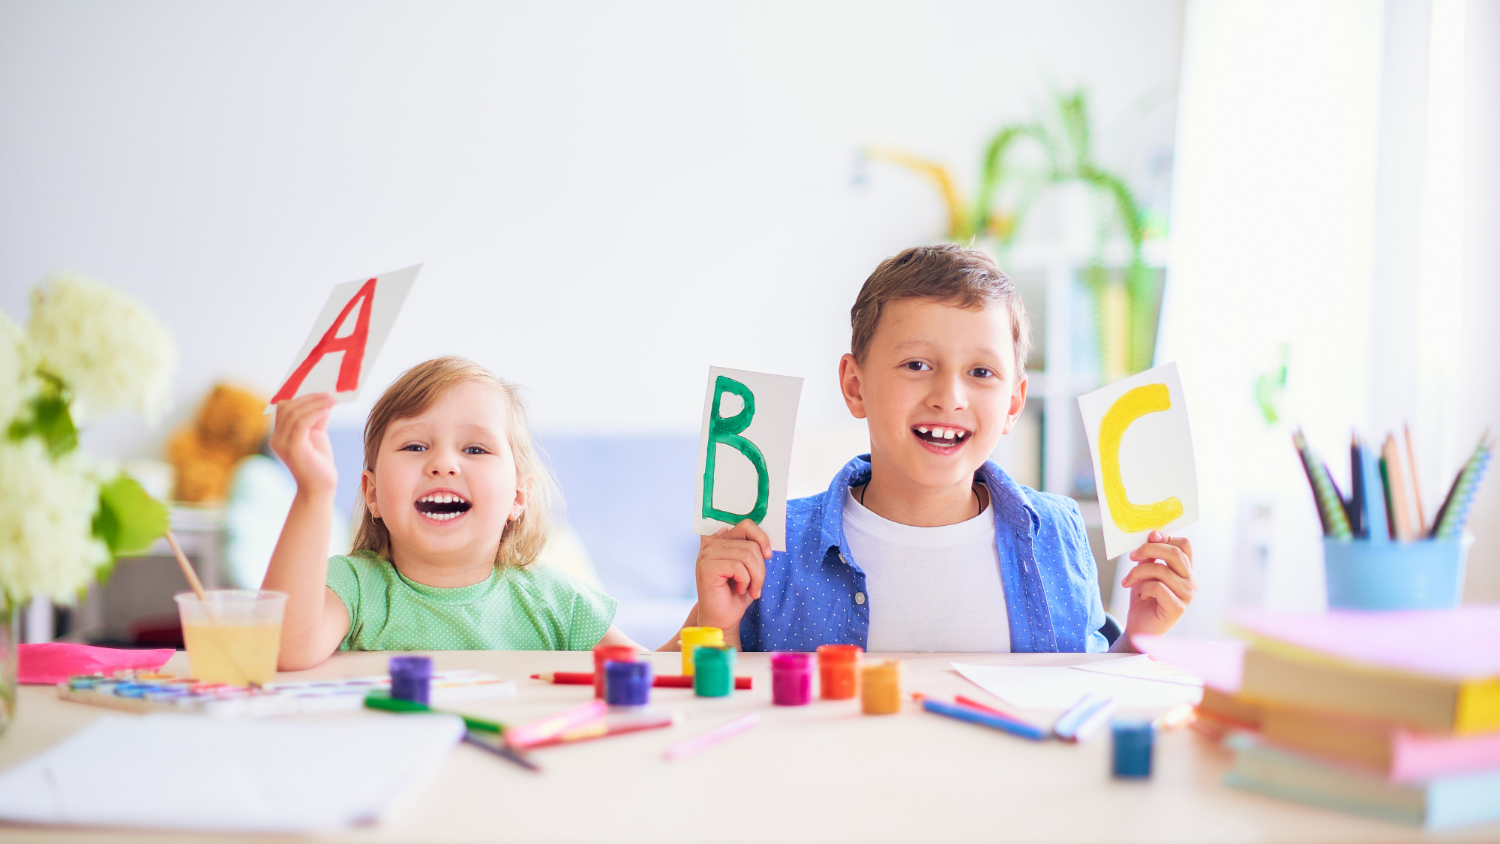 Vera Preschool and Daycare in Varthur, Bangalore, a place for fun learning and child growth.